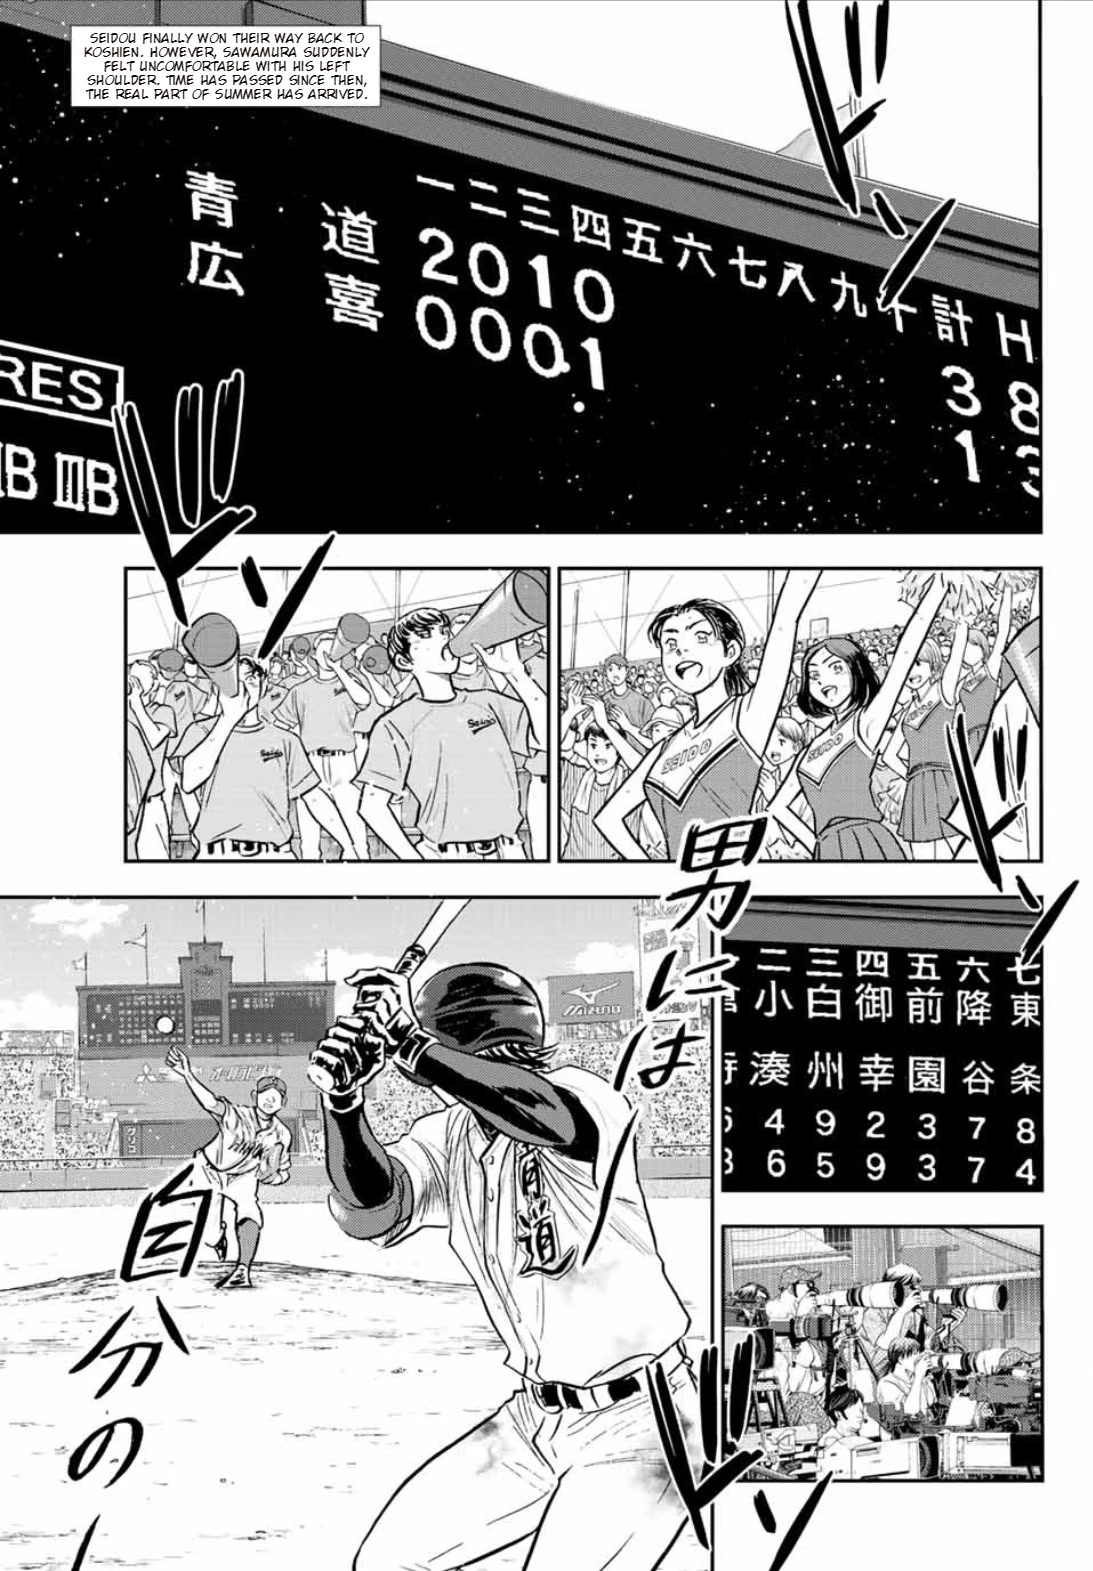 Daiya No A - Act Ii Chapter 308: Ace Of The Diamond [End] - Picture 3